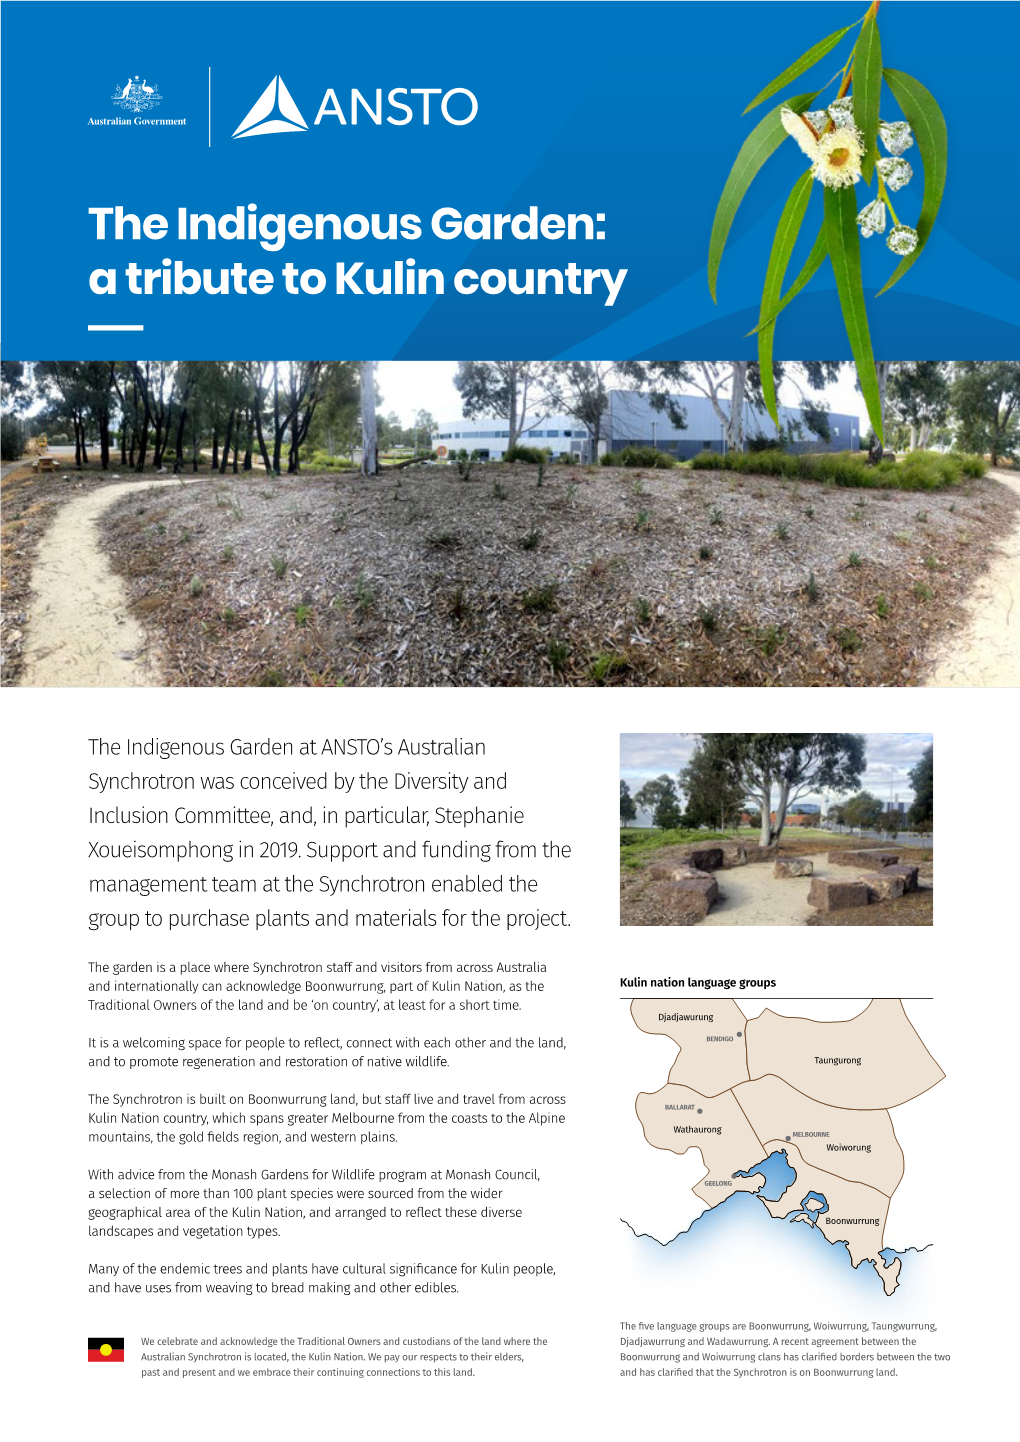 The Indigenous Garden: a Tribute to Kulin Country